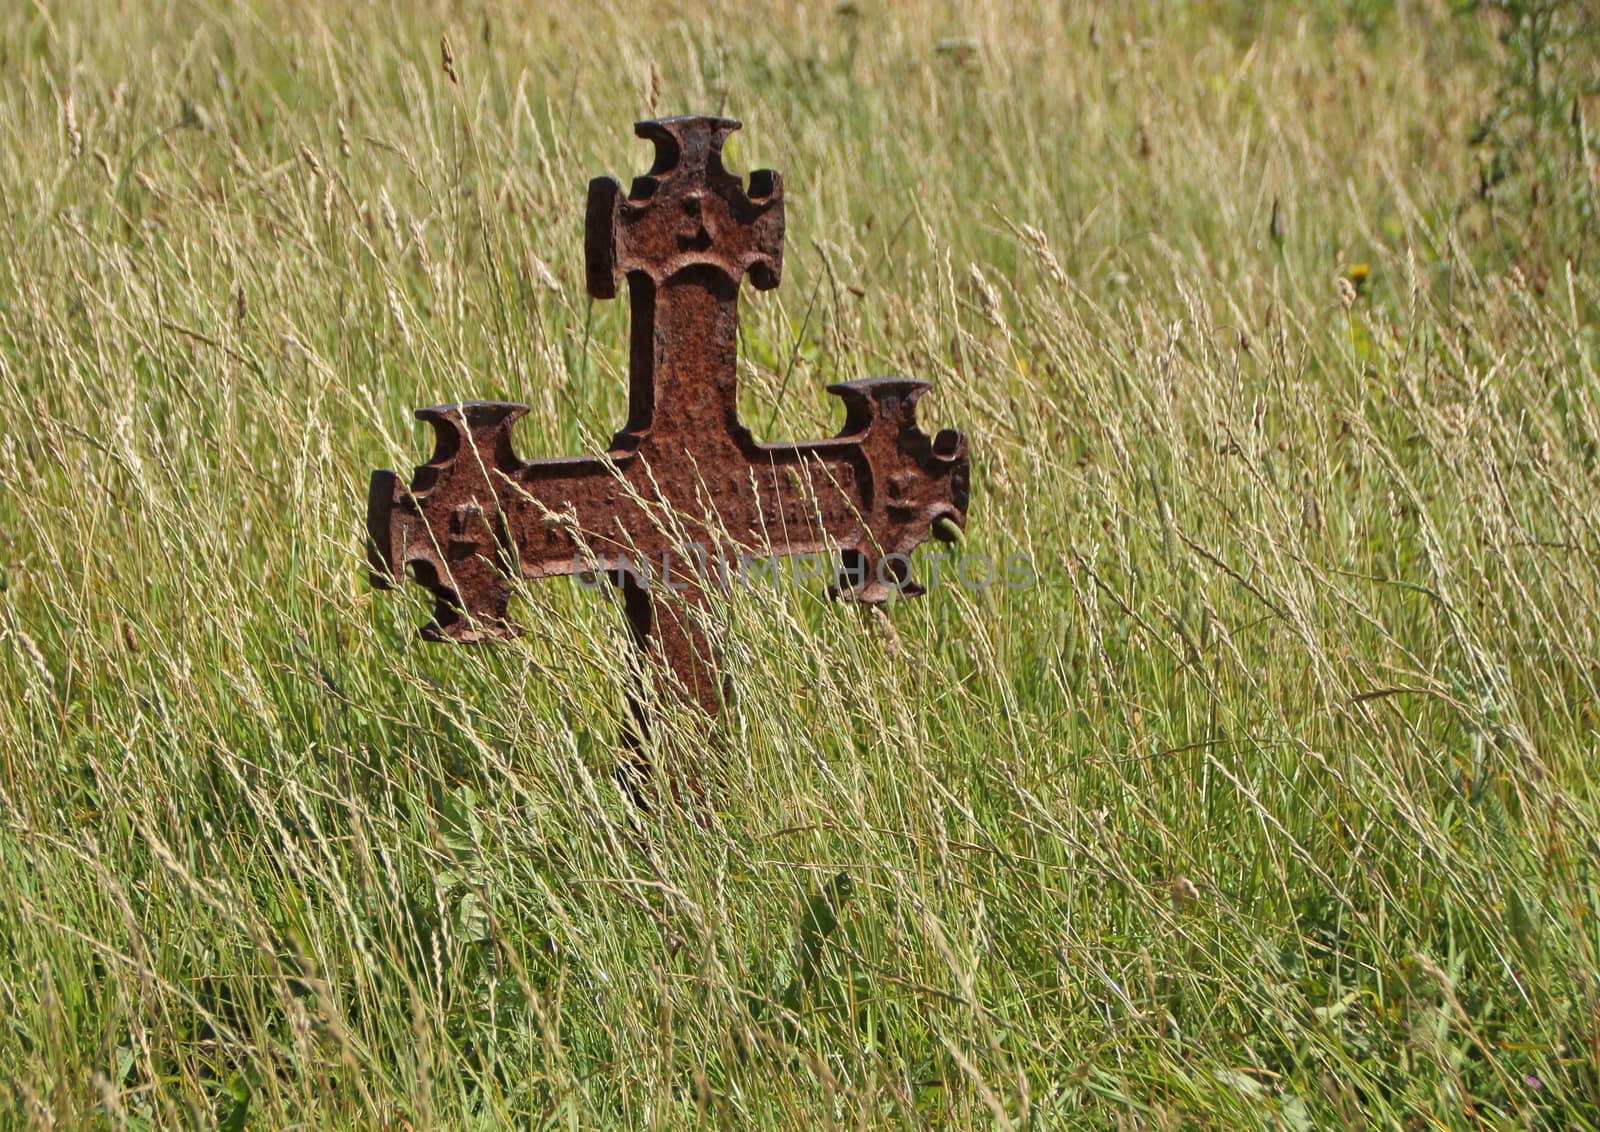 Isolated Rusty Iron Cross at Ancient Graveyard in Grass Field